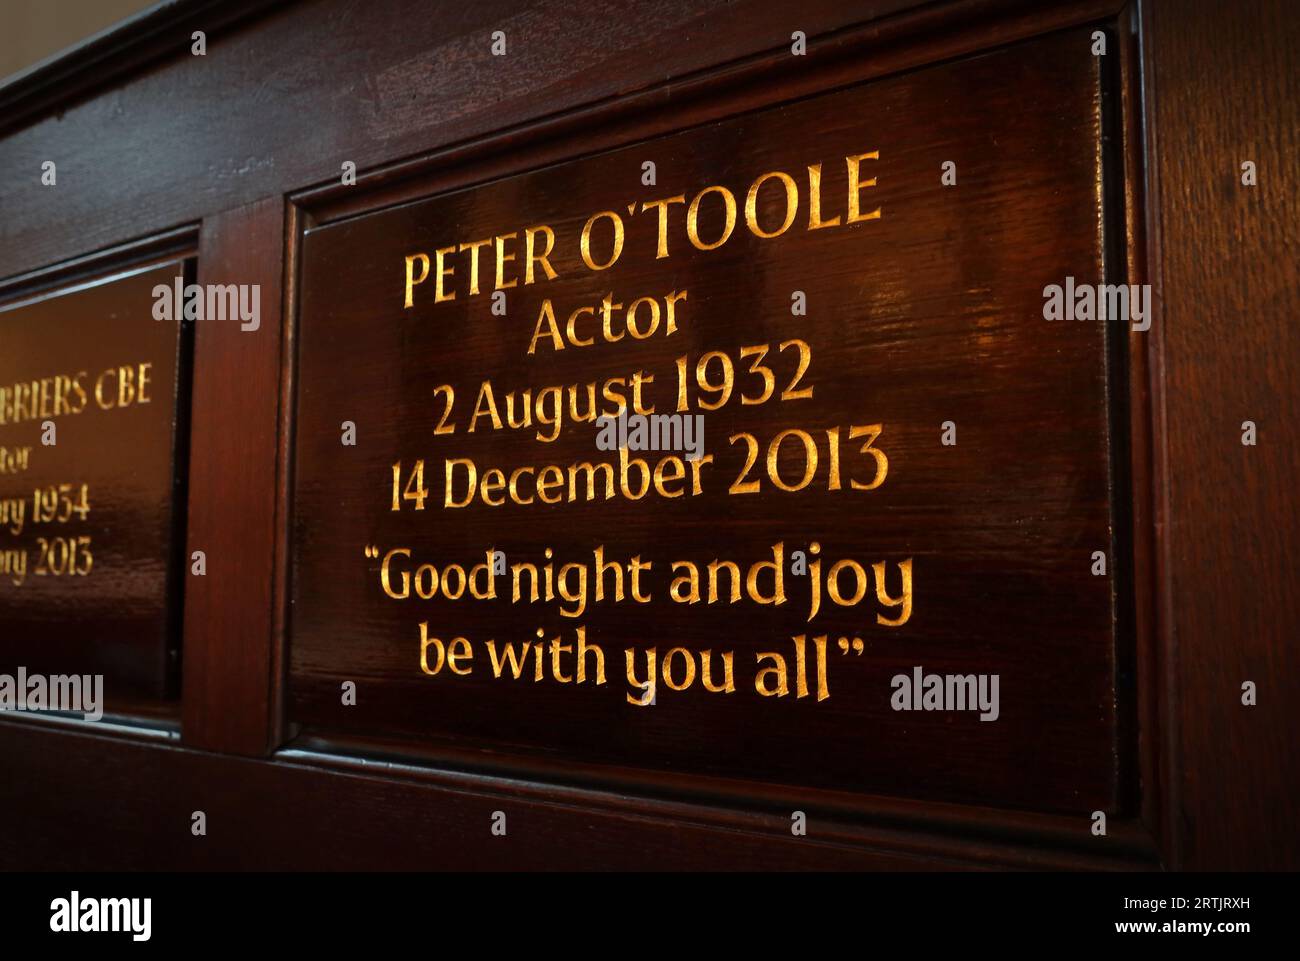 Peter O'Toole Memorial 1932-2013 à St Pauls, The Actors Church, Bedford St, Covent Garden, Londres, ANGLETERRE, ROYAUME-UNI, WC2E 9ED Banque D'Images